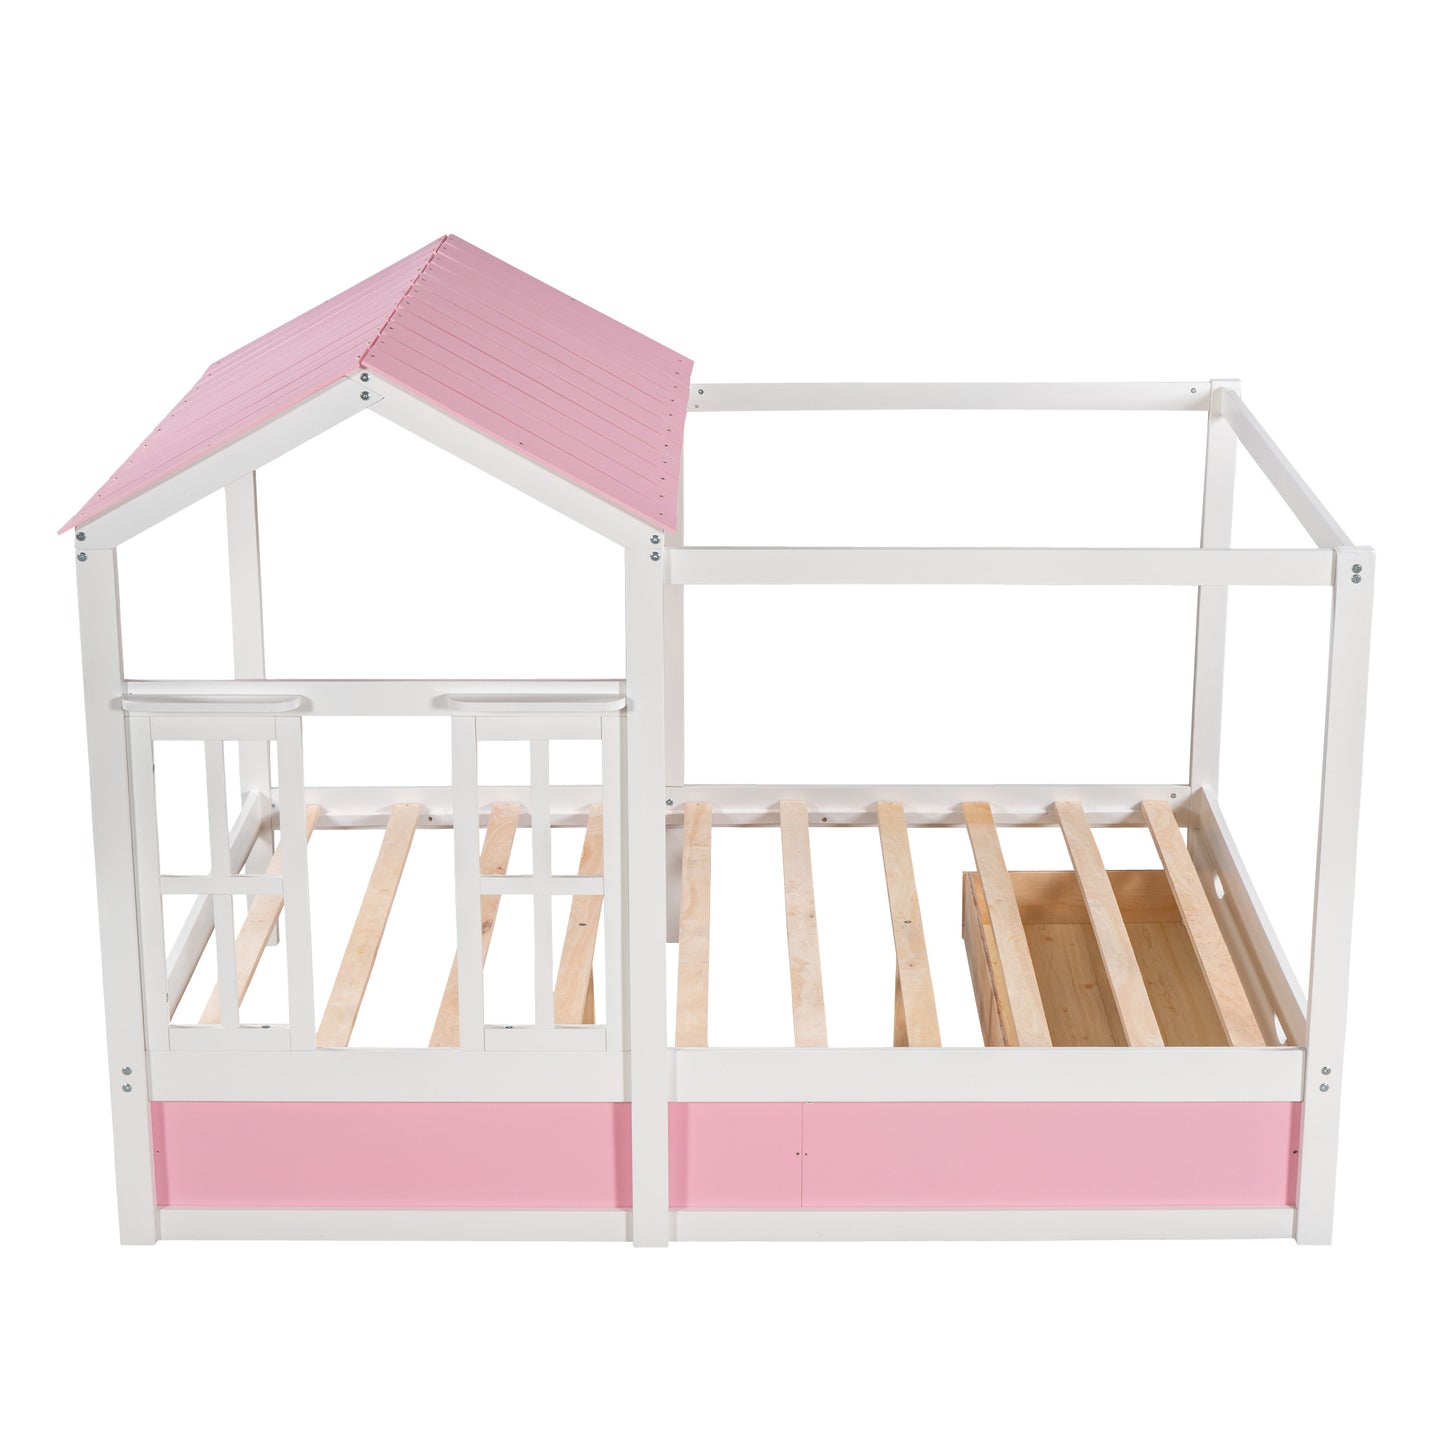 Full Size House Platform Bed with Roof, Window and Drawer - Pink + White